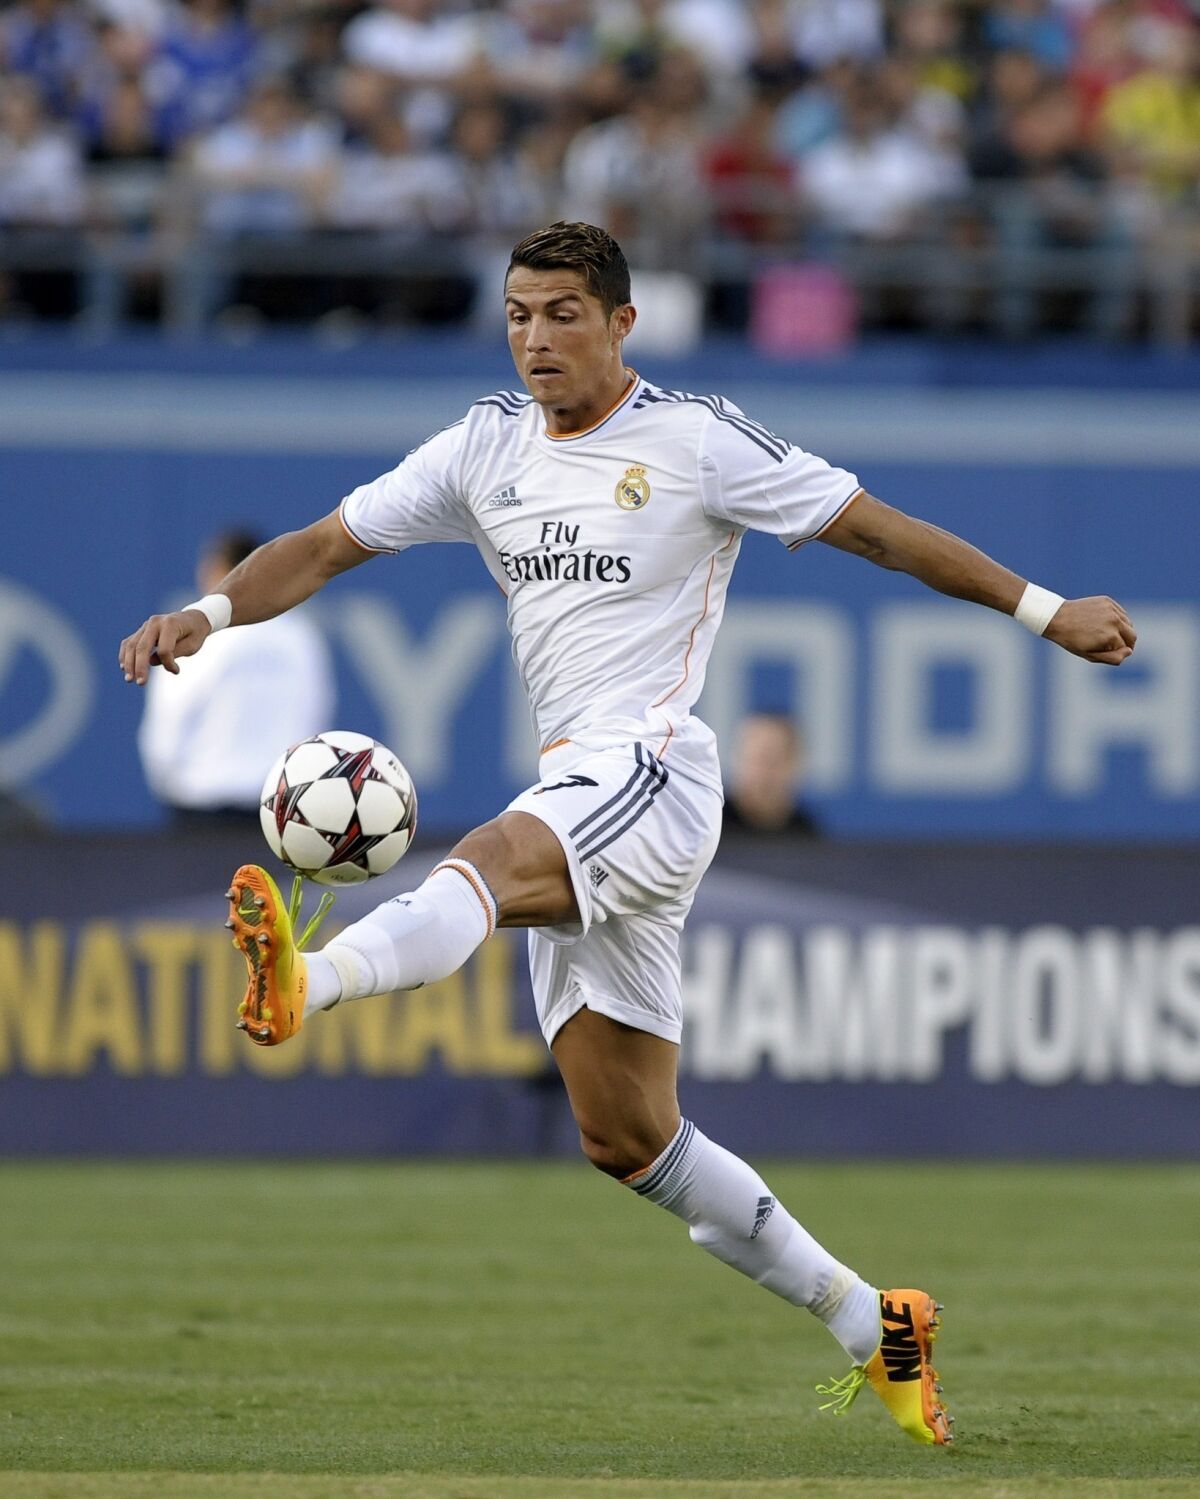 Cristiano Ronaldo controls the ball during Real Madrid's win over Everton in the Interational Champions Cup at Dodger Stadium on Saturday.